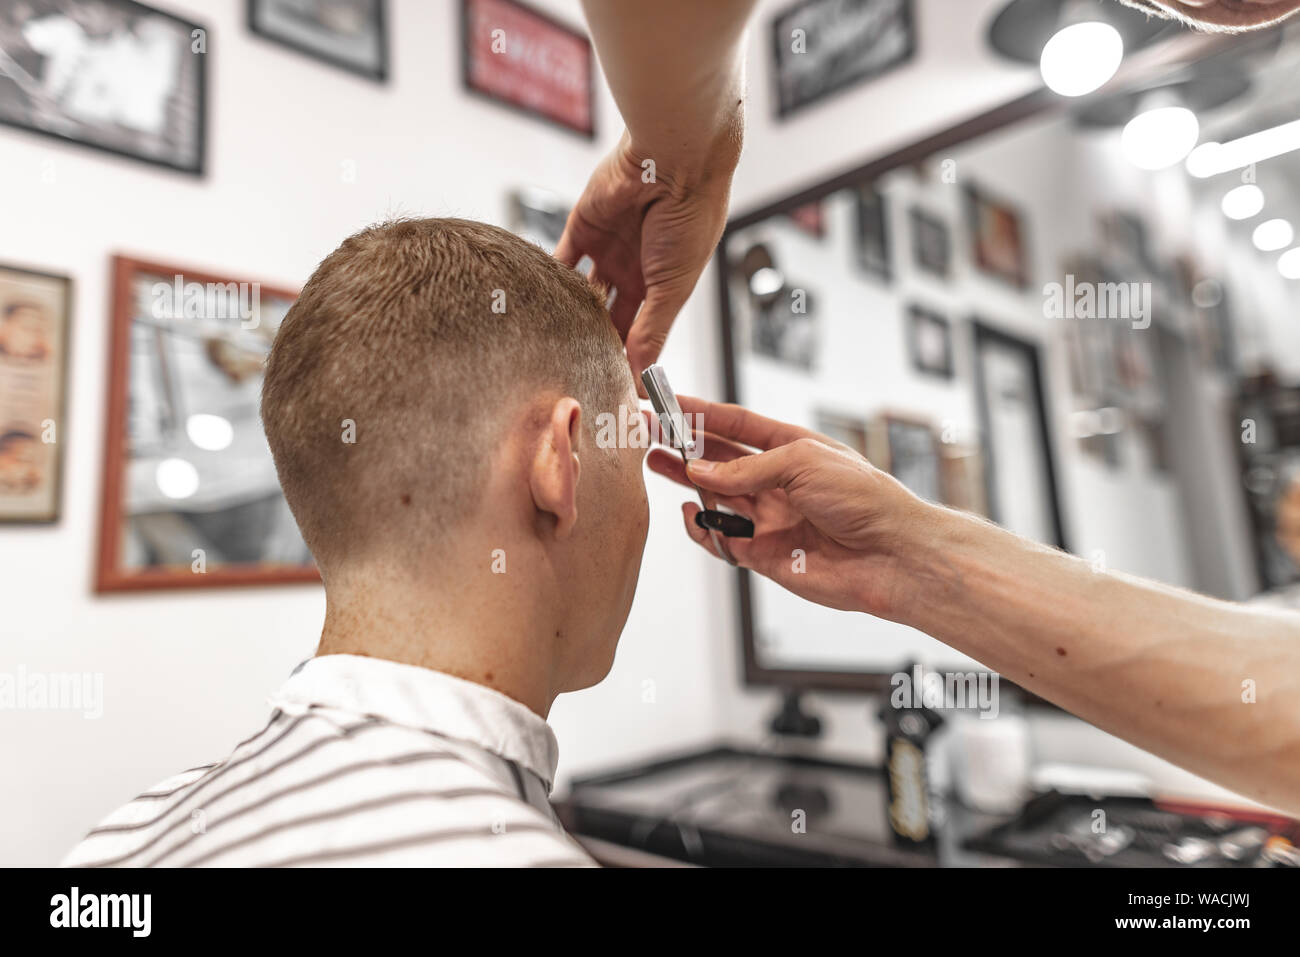 Barber makes a stylish haircut and styling for the client in the beauty salon. Stock Photo